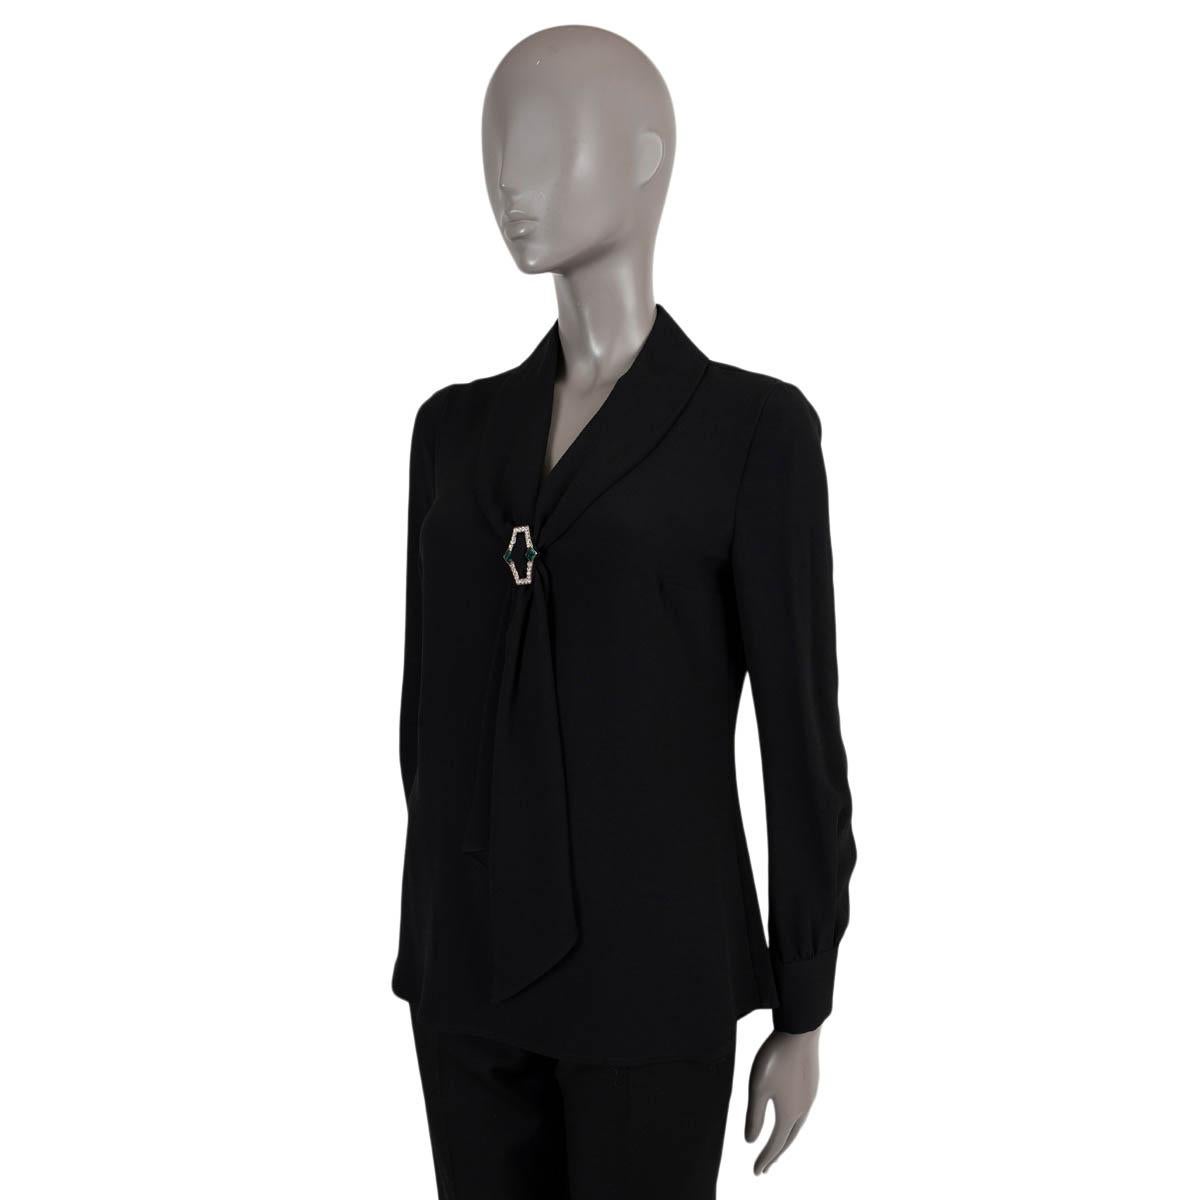 100% authentic Prada lavalier blouse in black silk (100%). Features a shawl collar with rhinestone encrusted gold-tone scarf ring in clear and green. Opens with a concealed zipper in the back. Has been worn and is in excellent